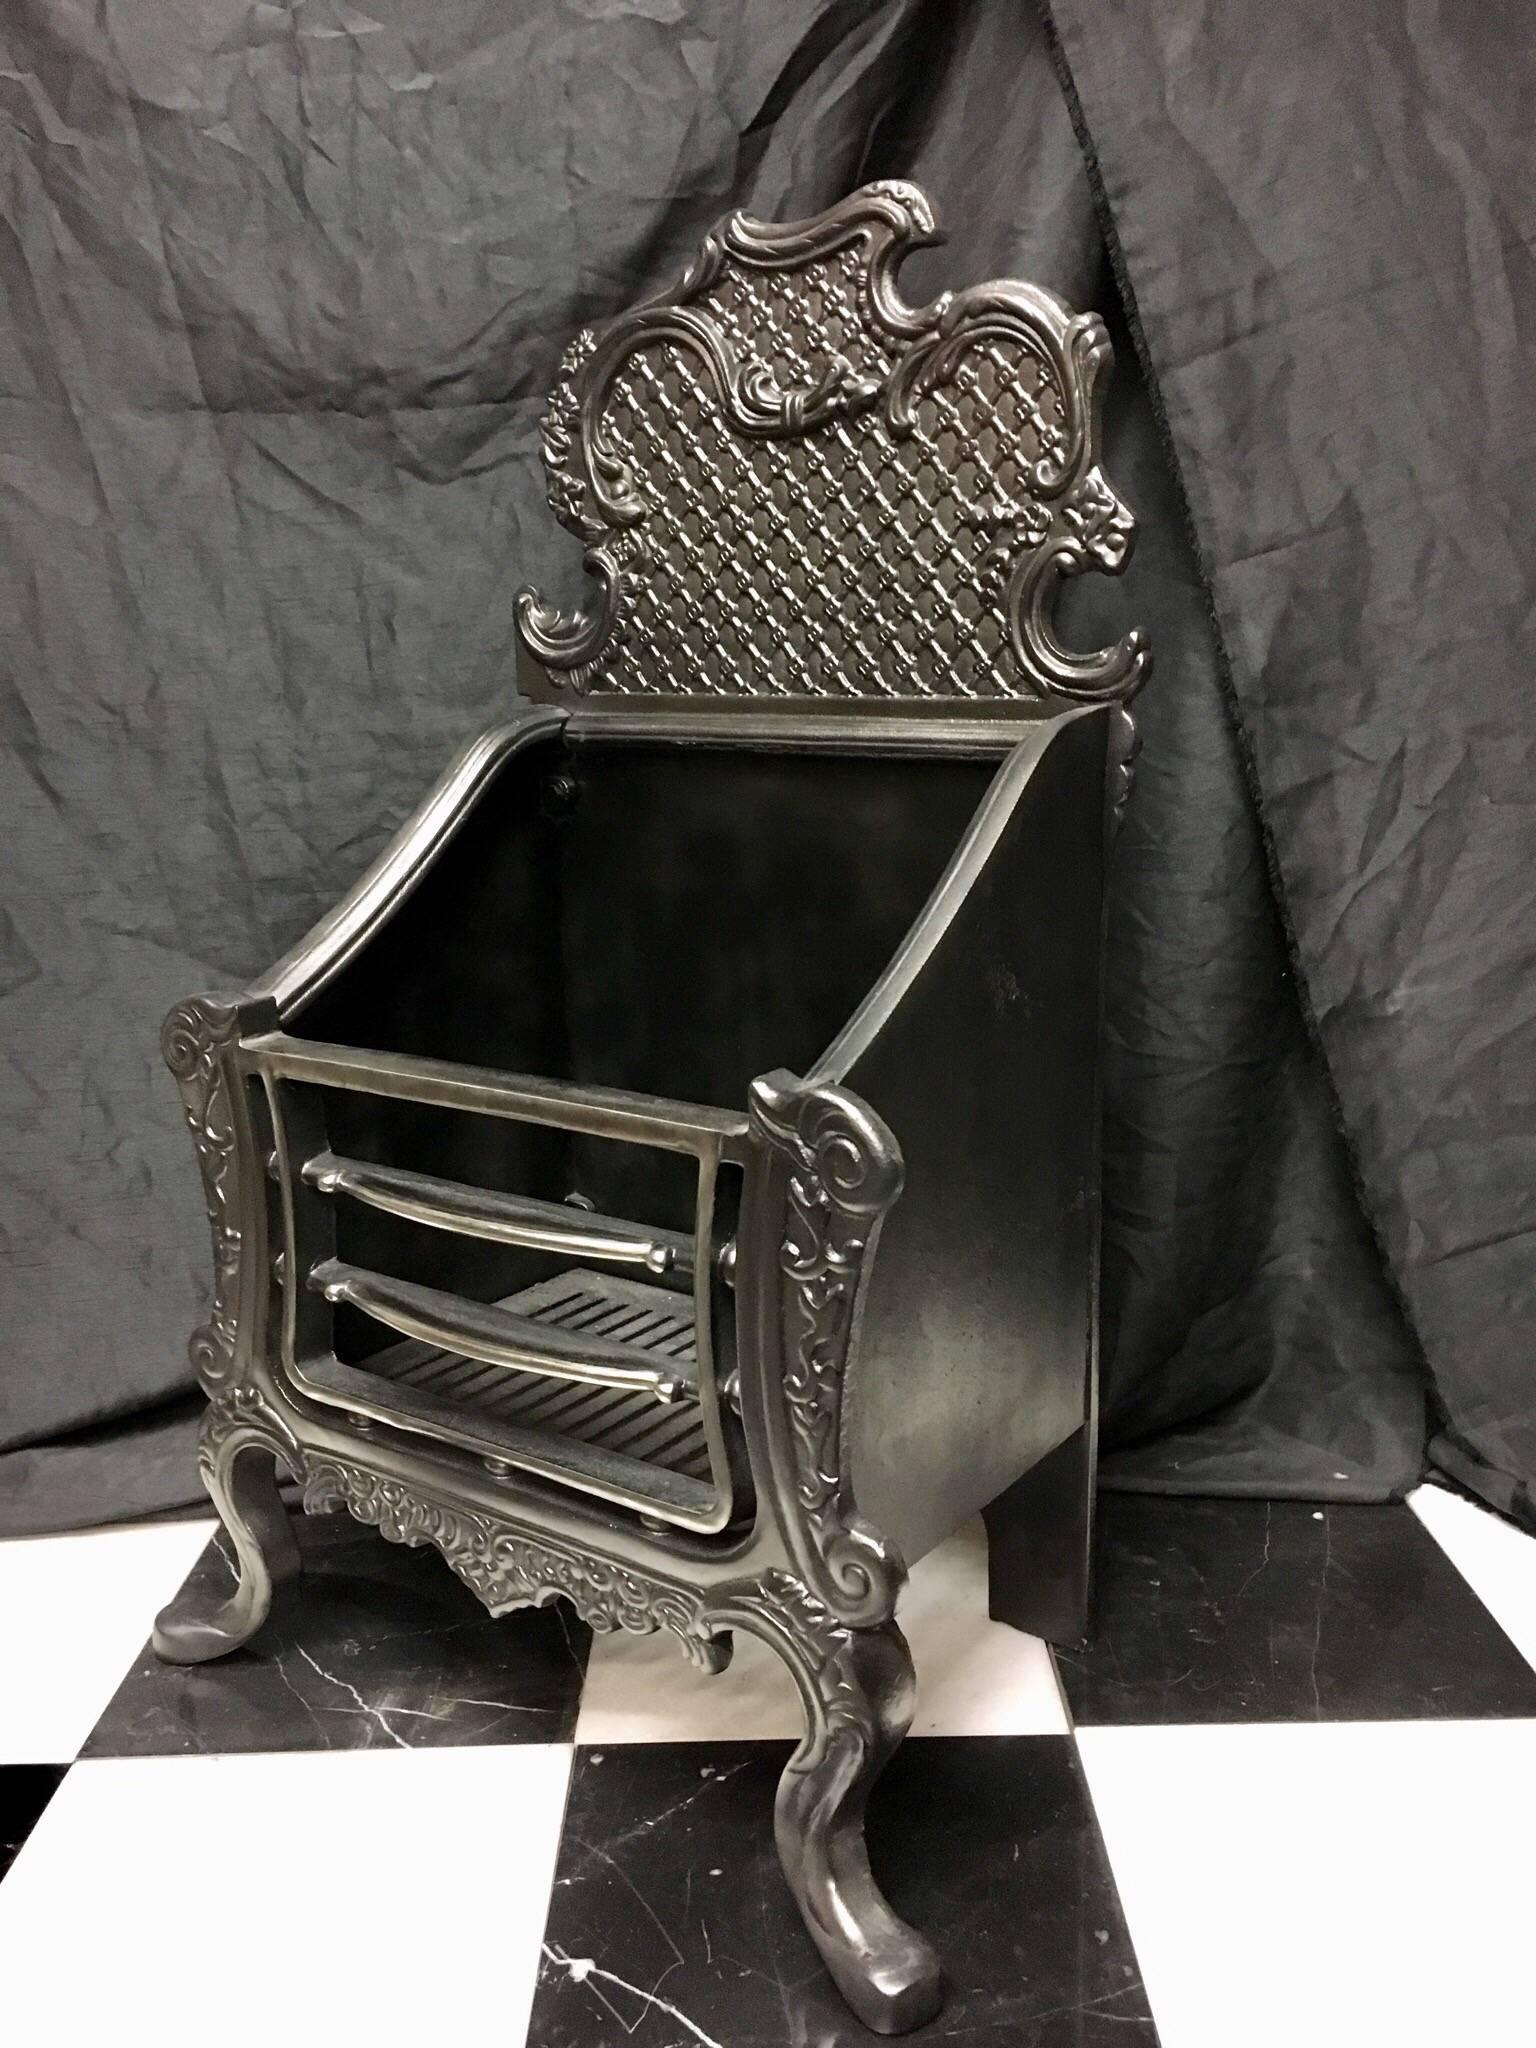 A period cast iron Rococo style fire grate in the ornate 18th century English Rococo manner of Thomas Chippendale. The tall 